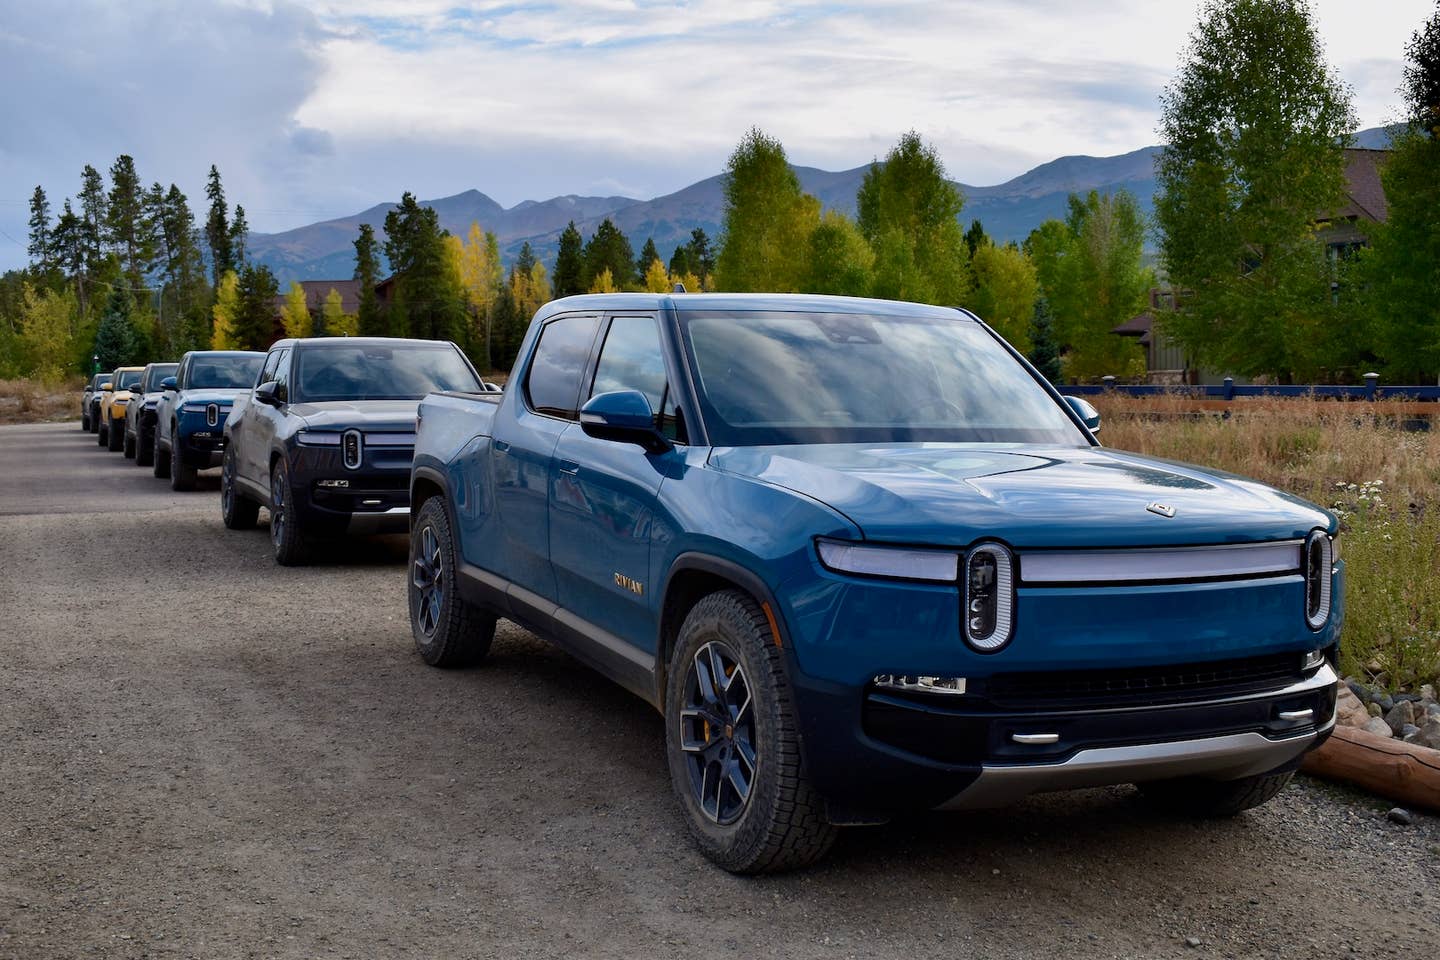 Pre-production 2022 Rivian R1Ts lined up in Colorado